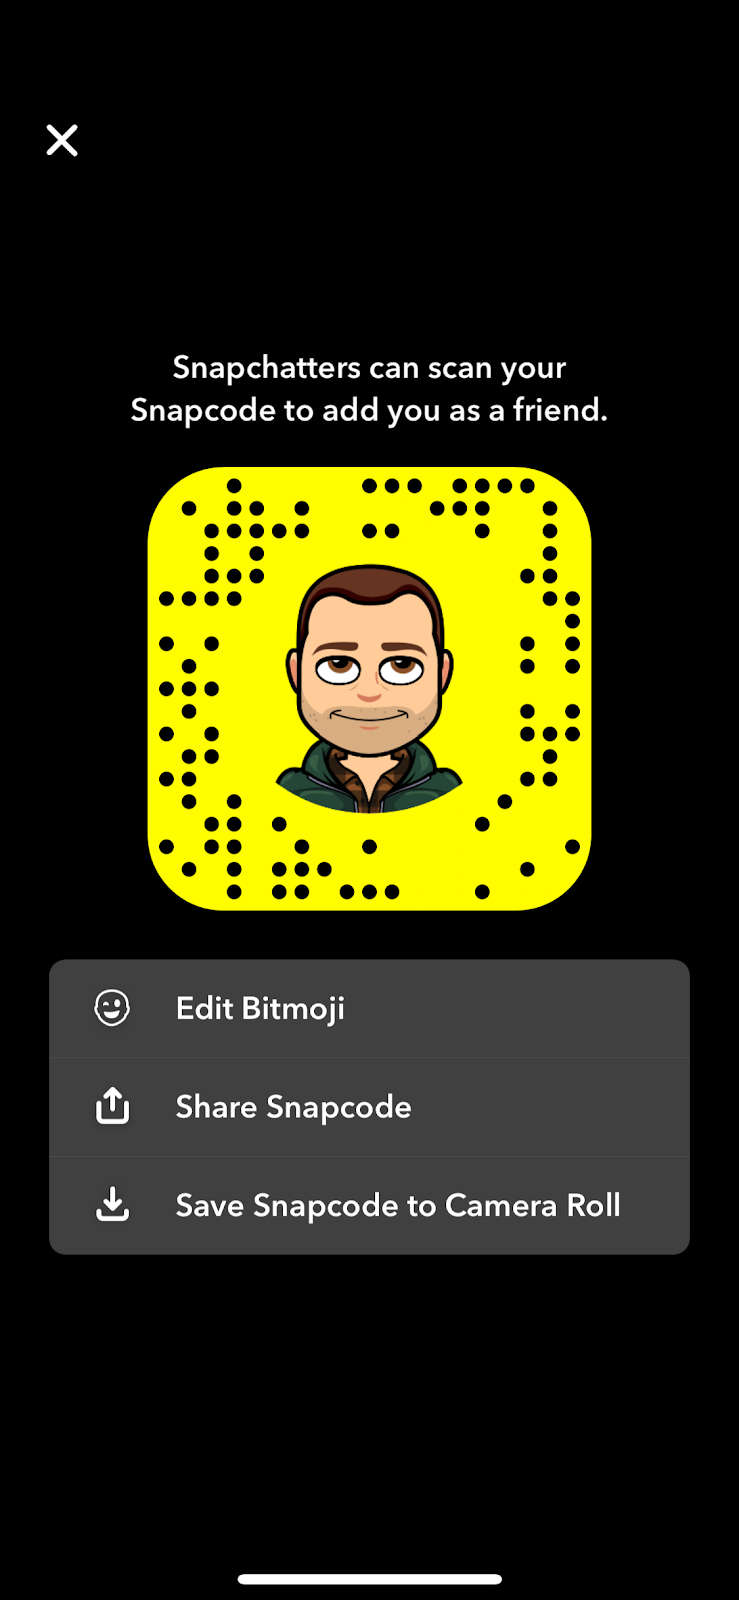 get more snapchat friends with your QR code 